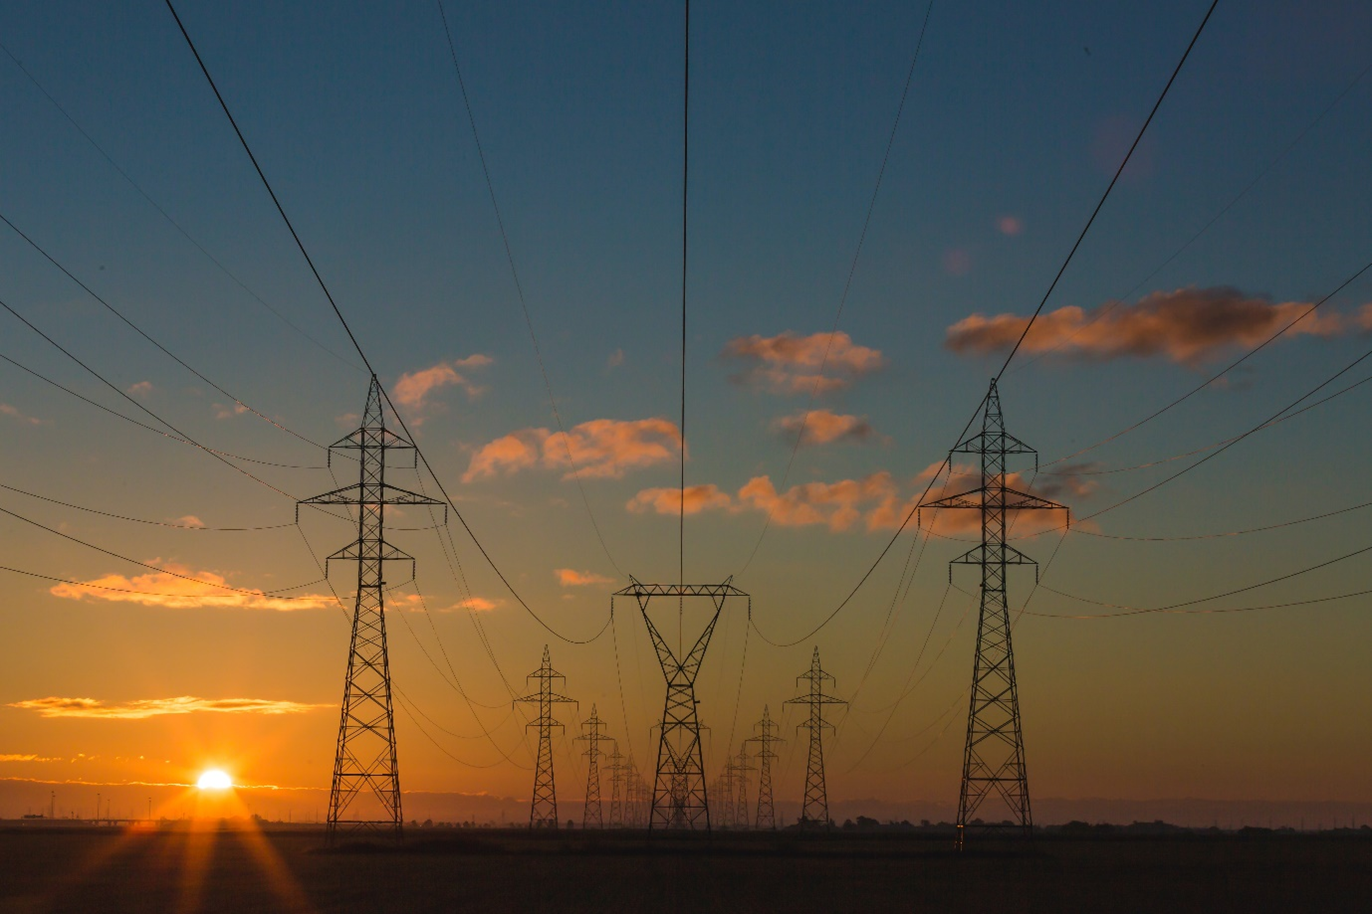 Australia’s Grid: The Electrical Transition